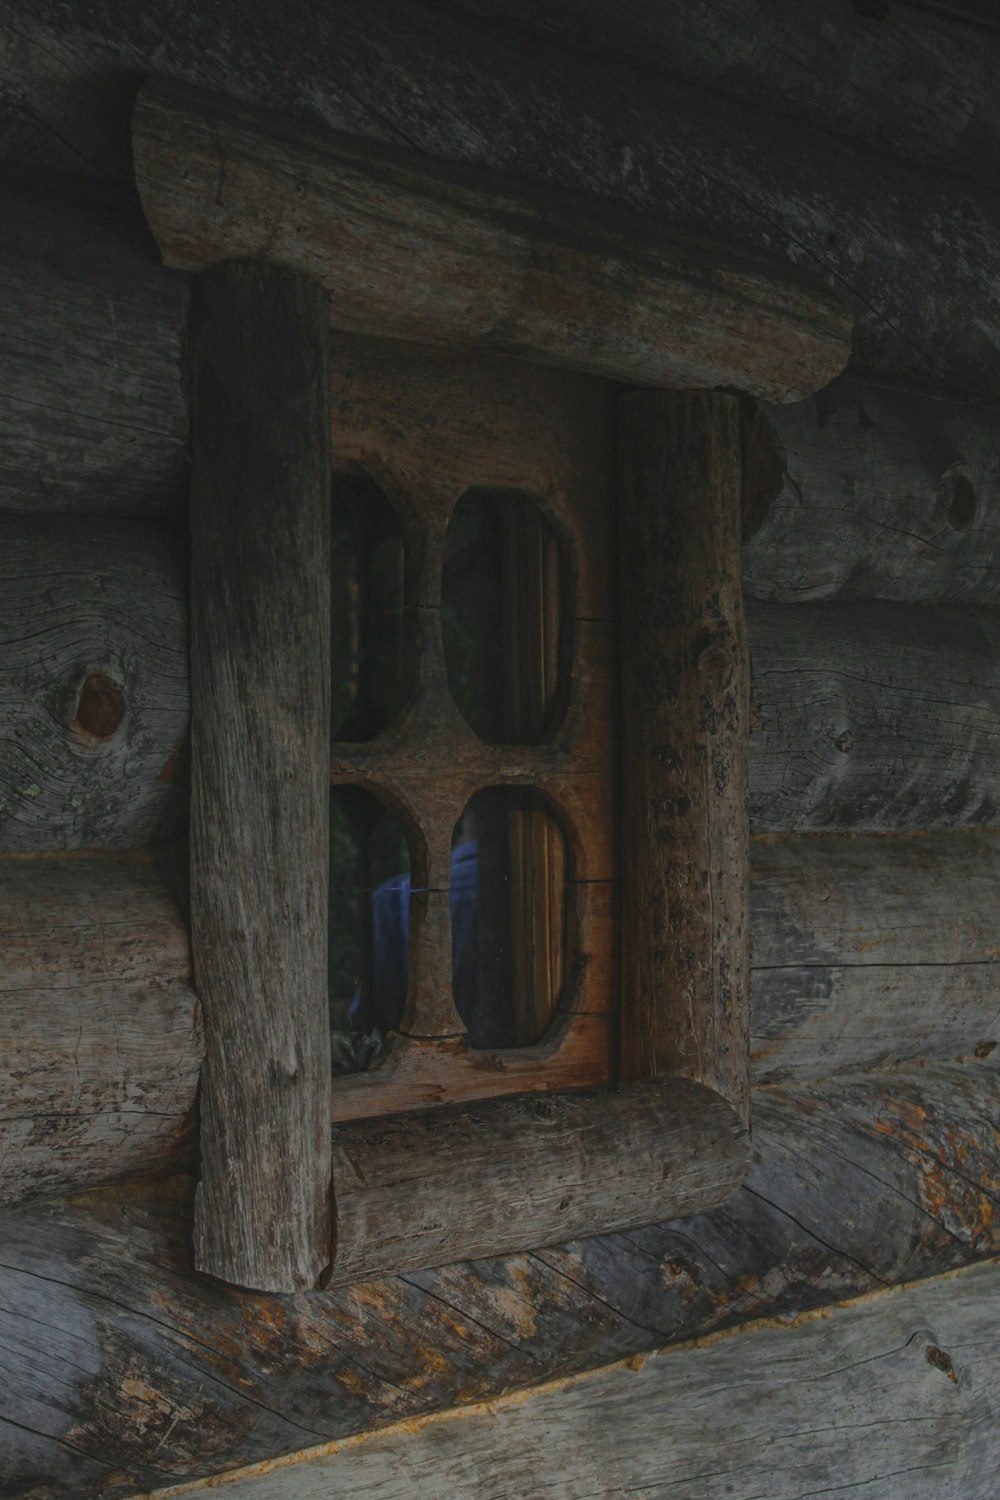 a close up of a window in a log cabin